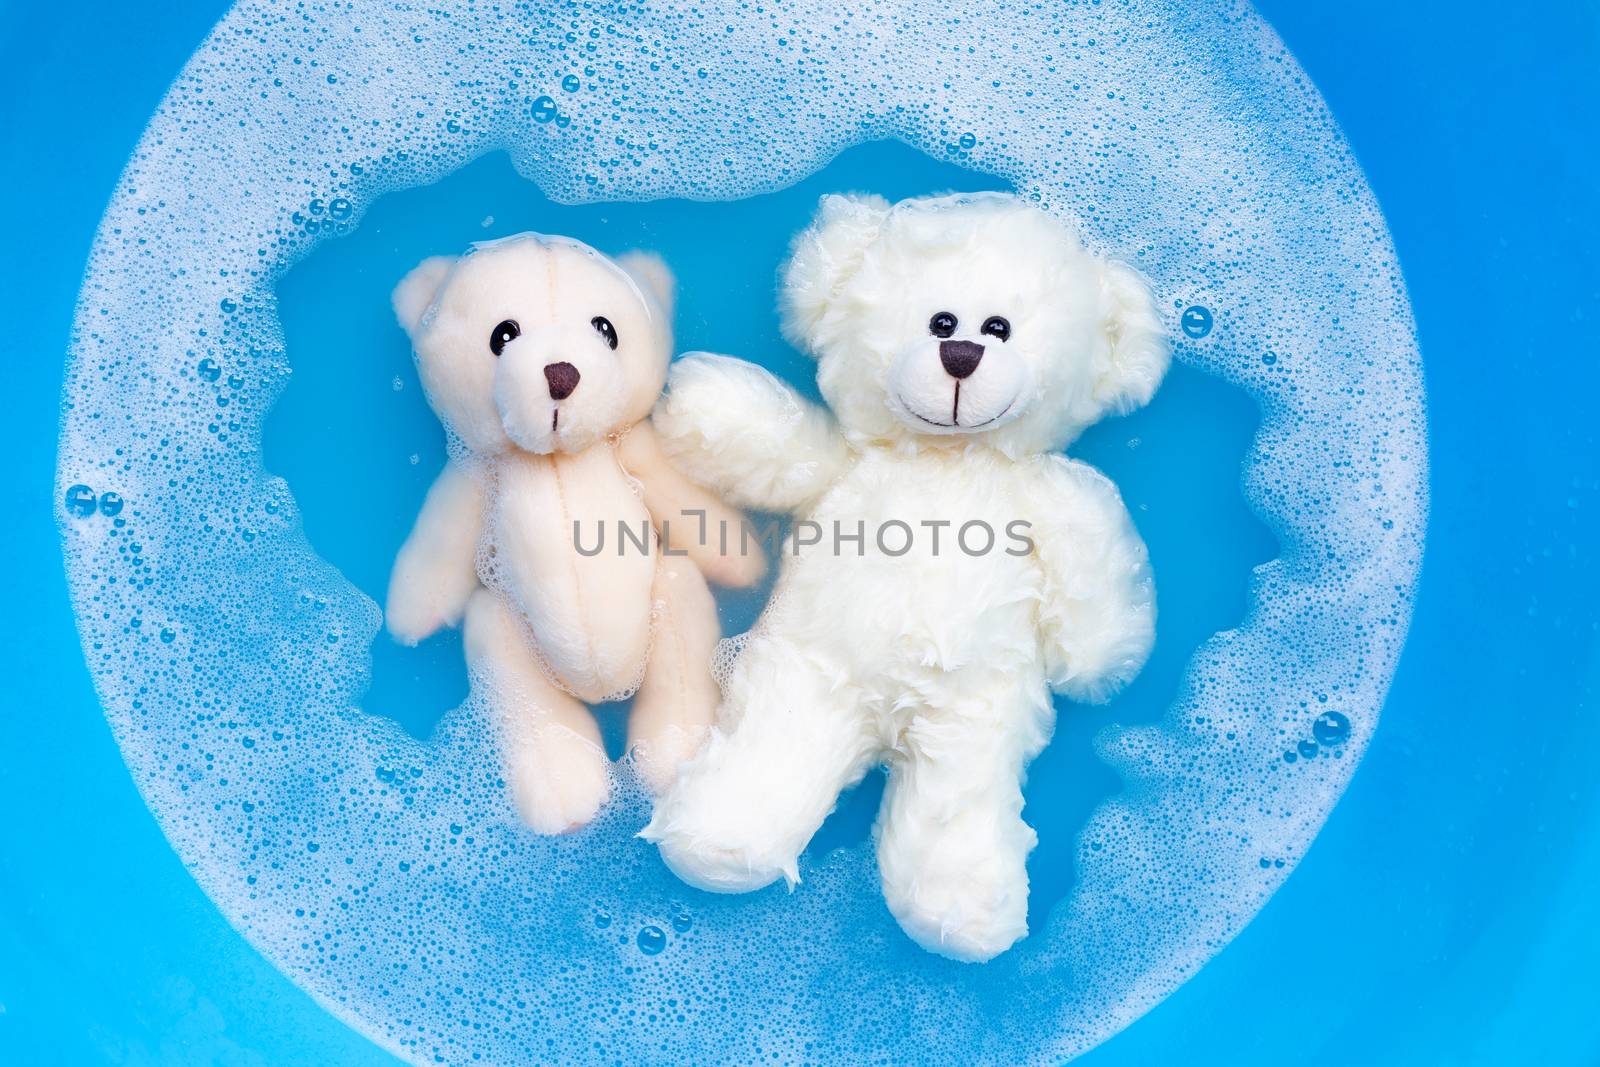 Soak  two toy bears in laundry detergent water dissolution before washing.  Laundry concept, Top view